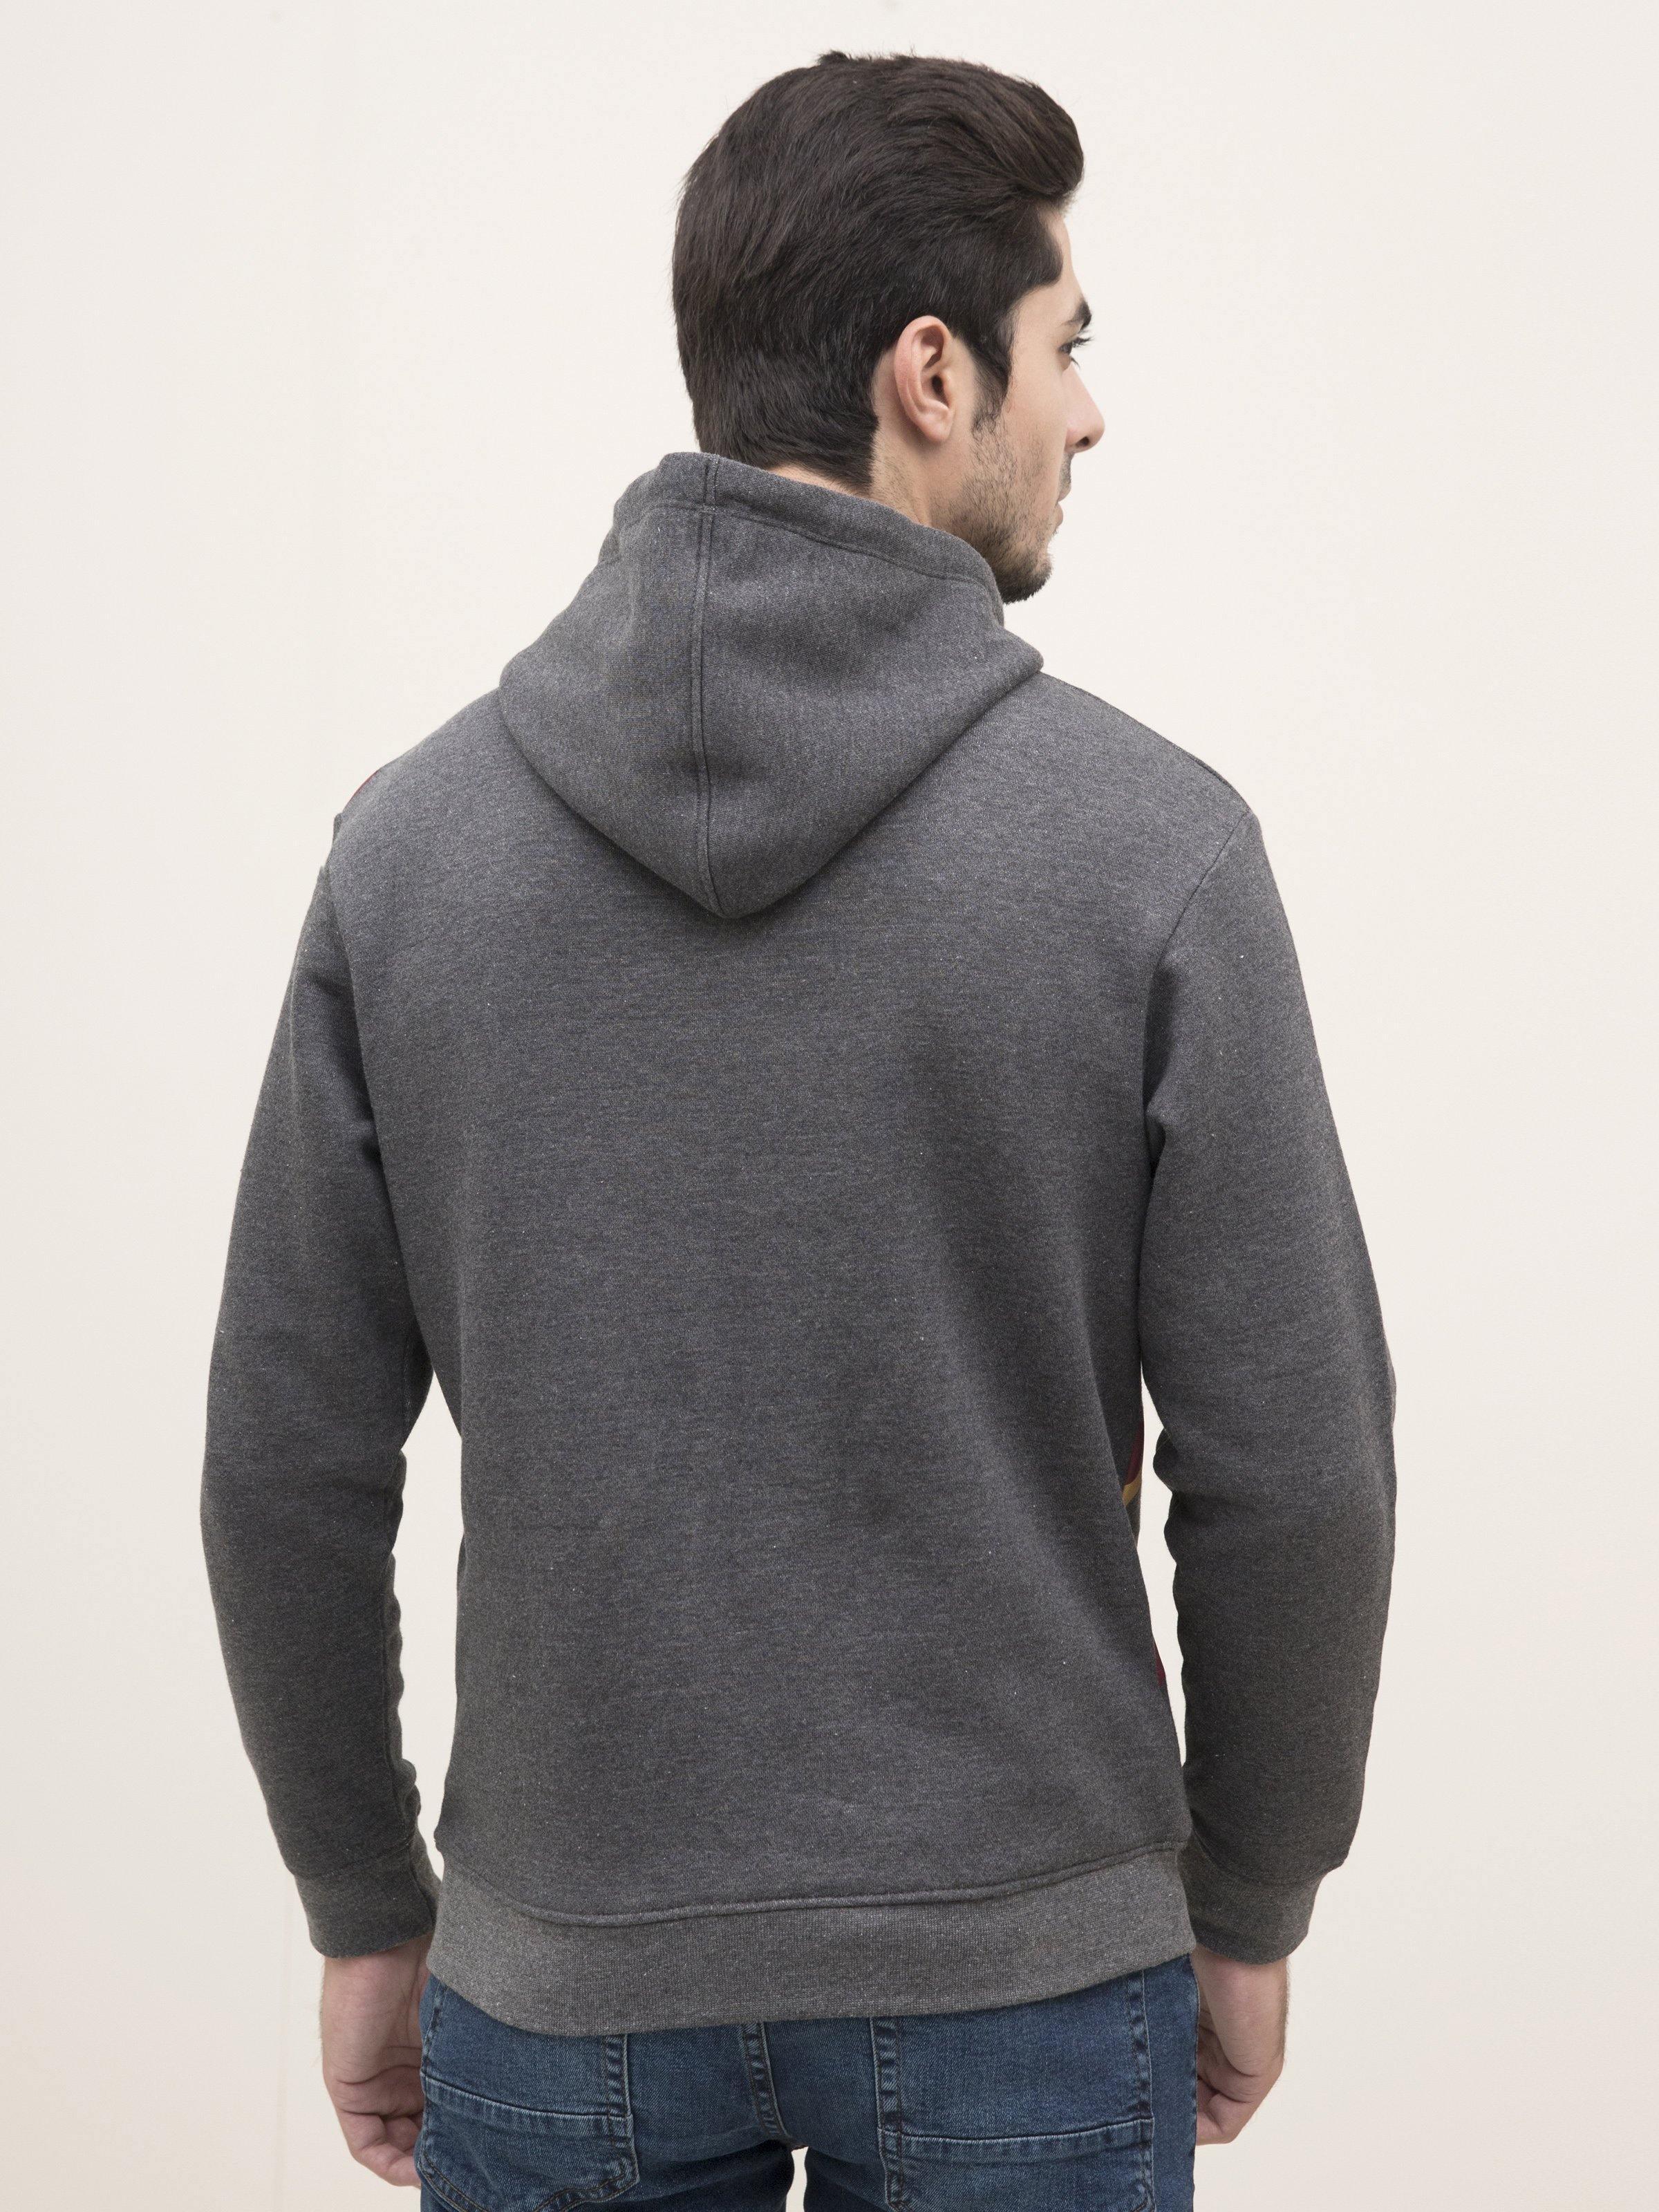 JACKET FULL SLEEVE KNIT HOODIE CHARCOAL GREY at Charcoal Clothing